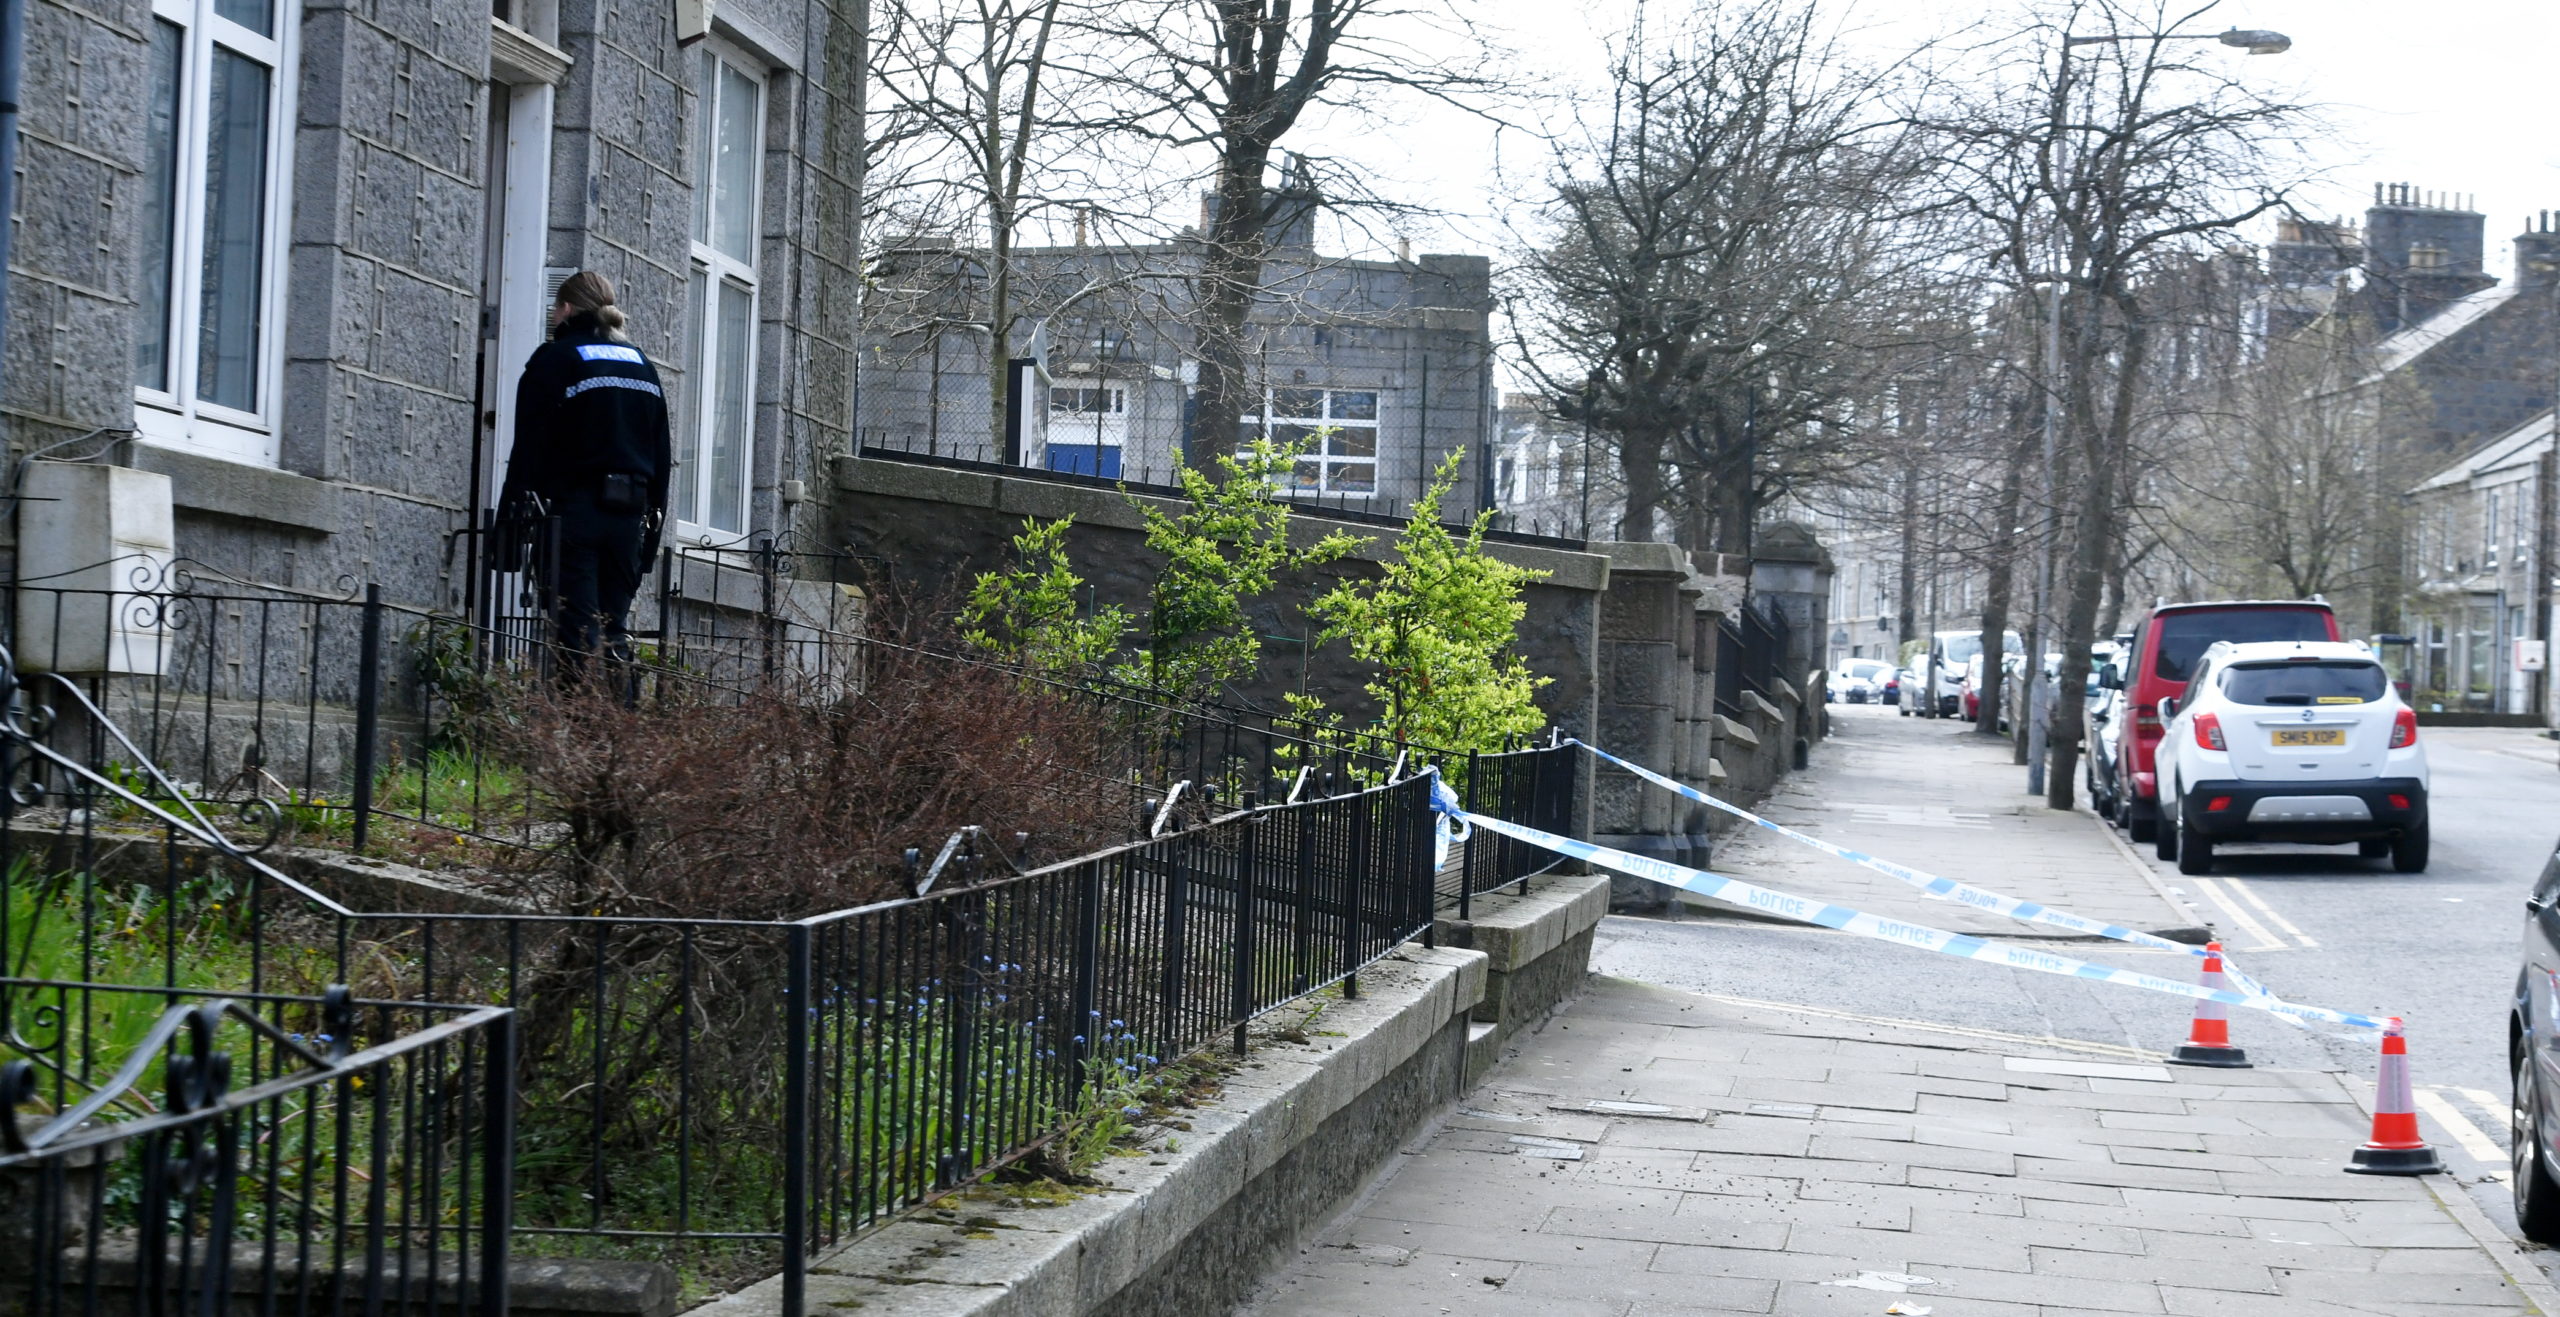 Police presence on Walker Road following an attempted murder. 
Picture by Chris Sumner.